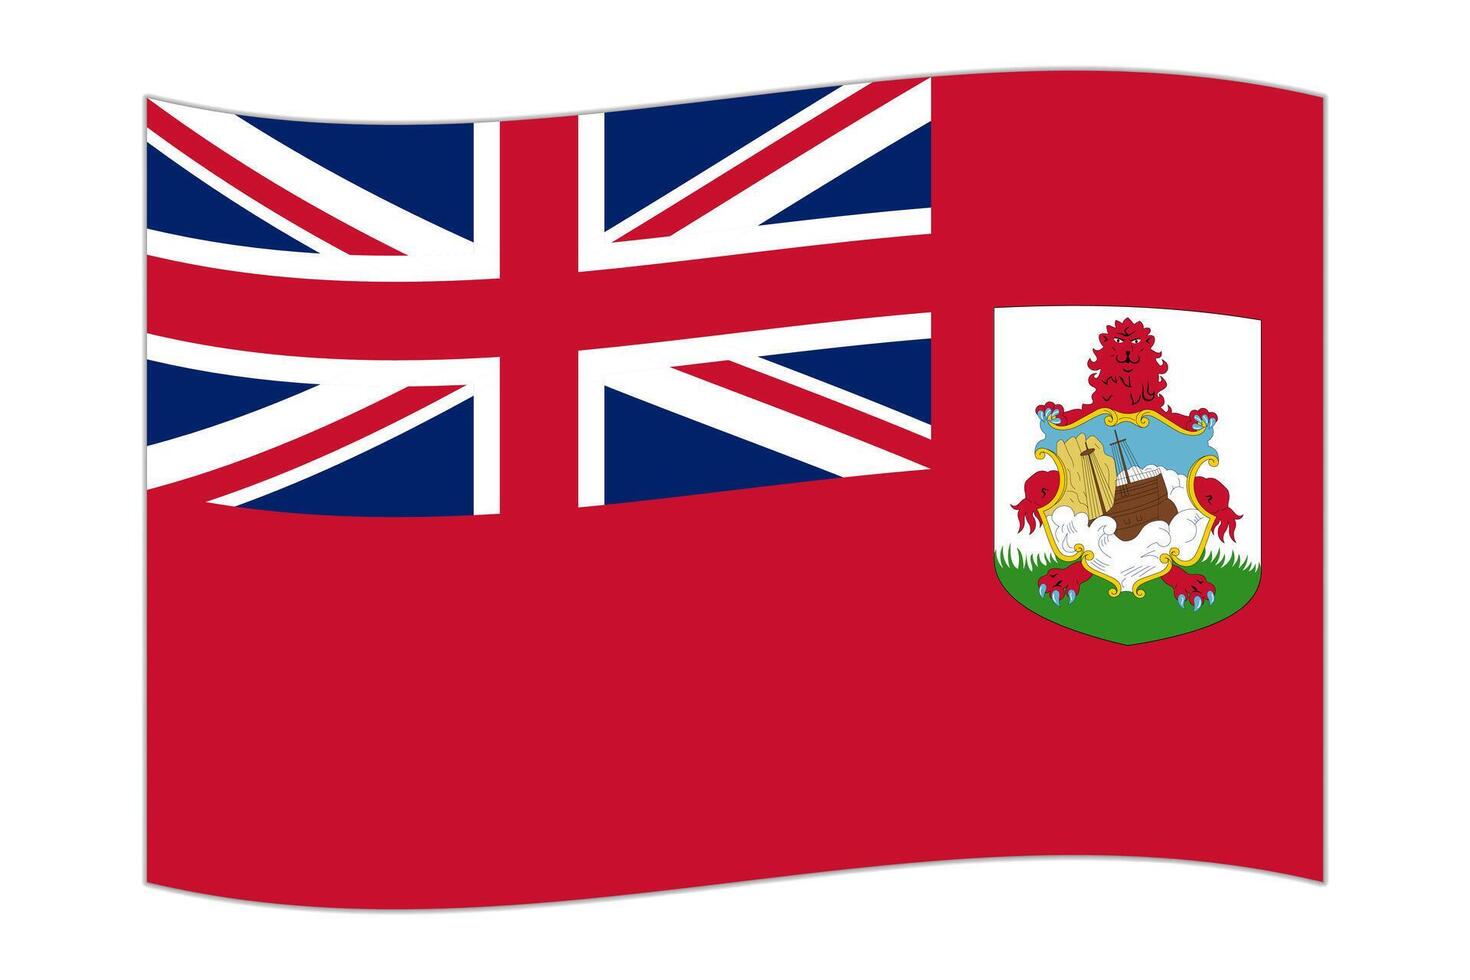 Waving flag of the country Bermuda. Vector illustration.